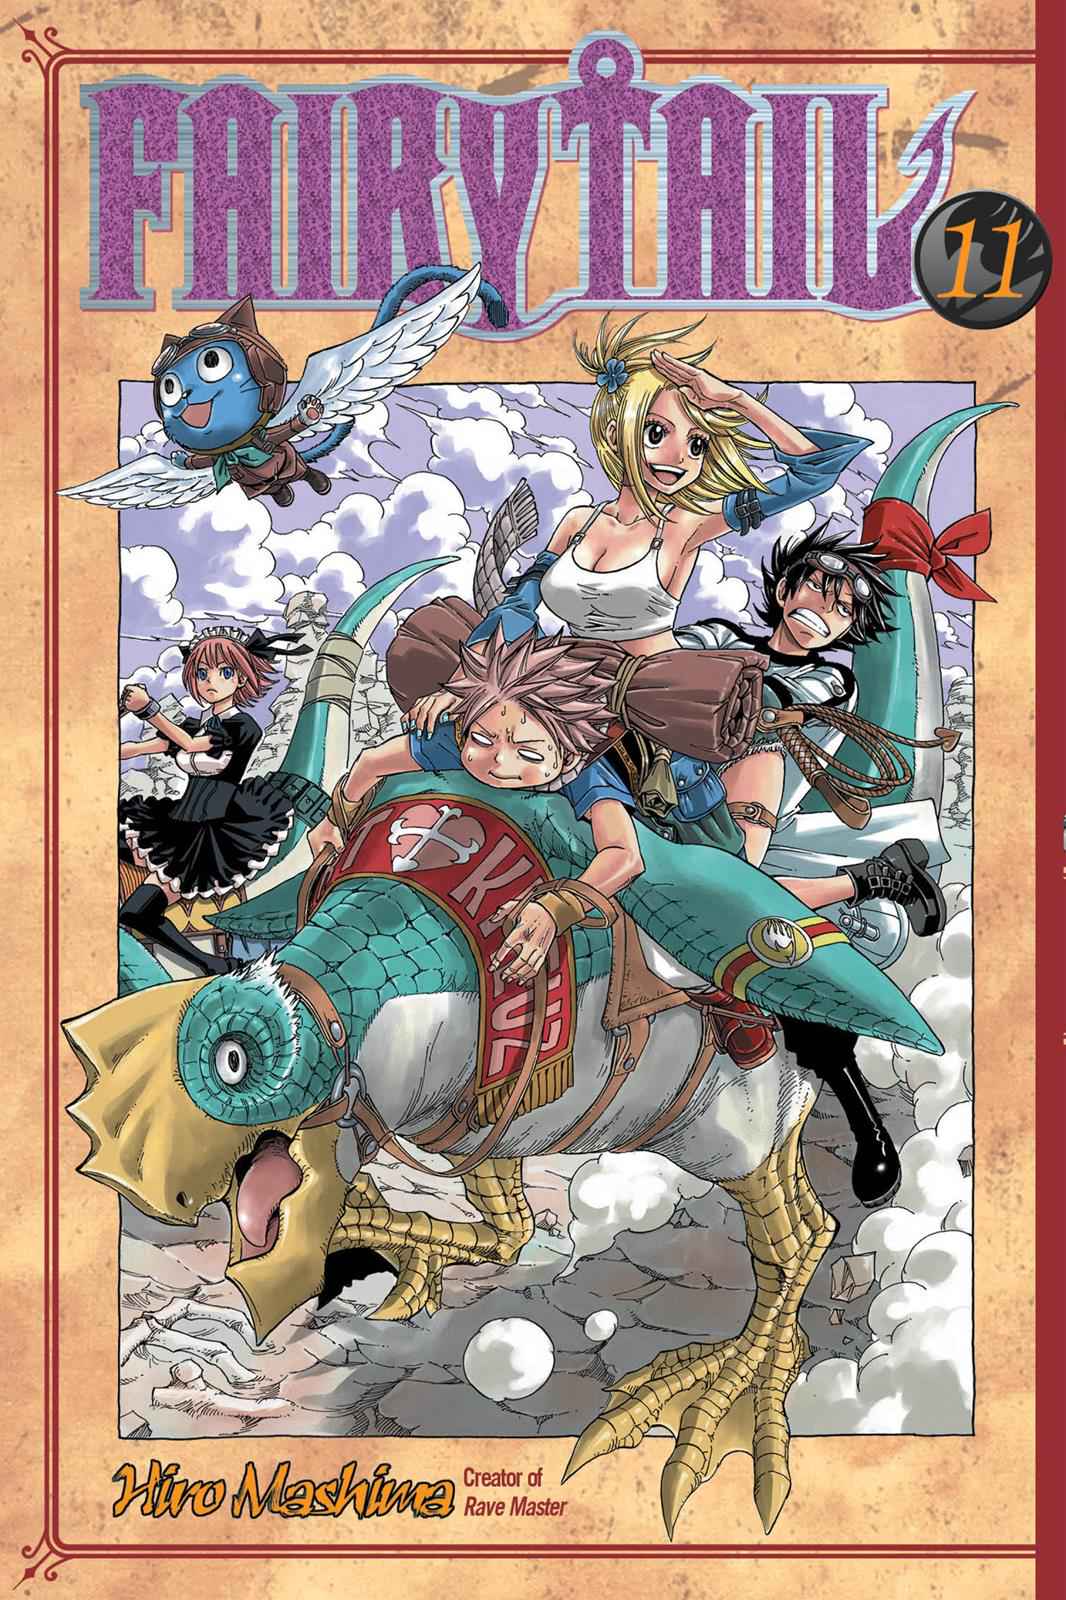 Lucy Heartfilia in Fairy Tail Manga Volume and Chapter Covers